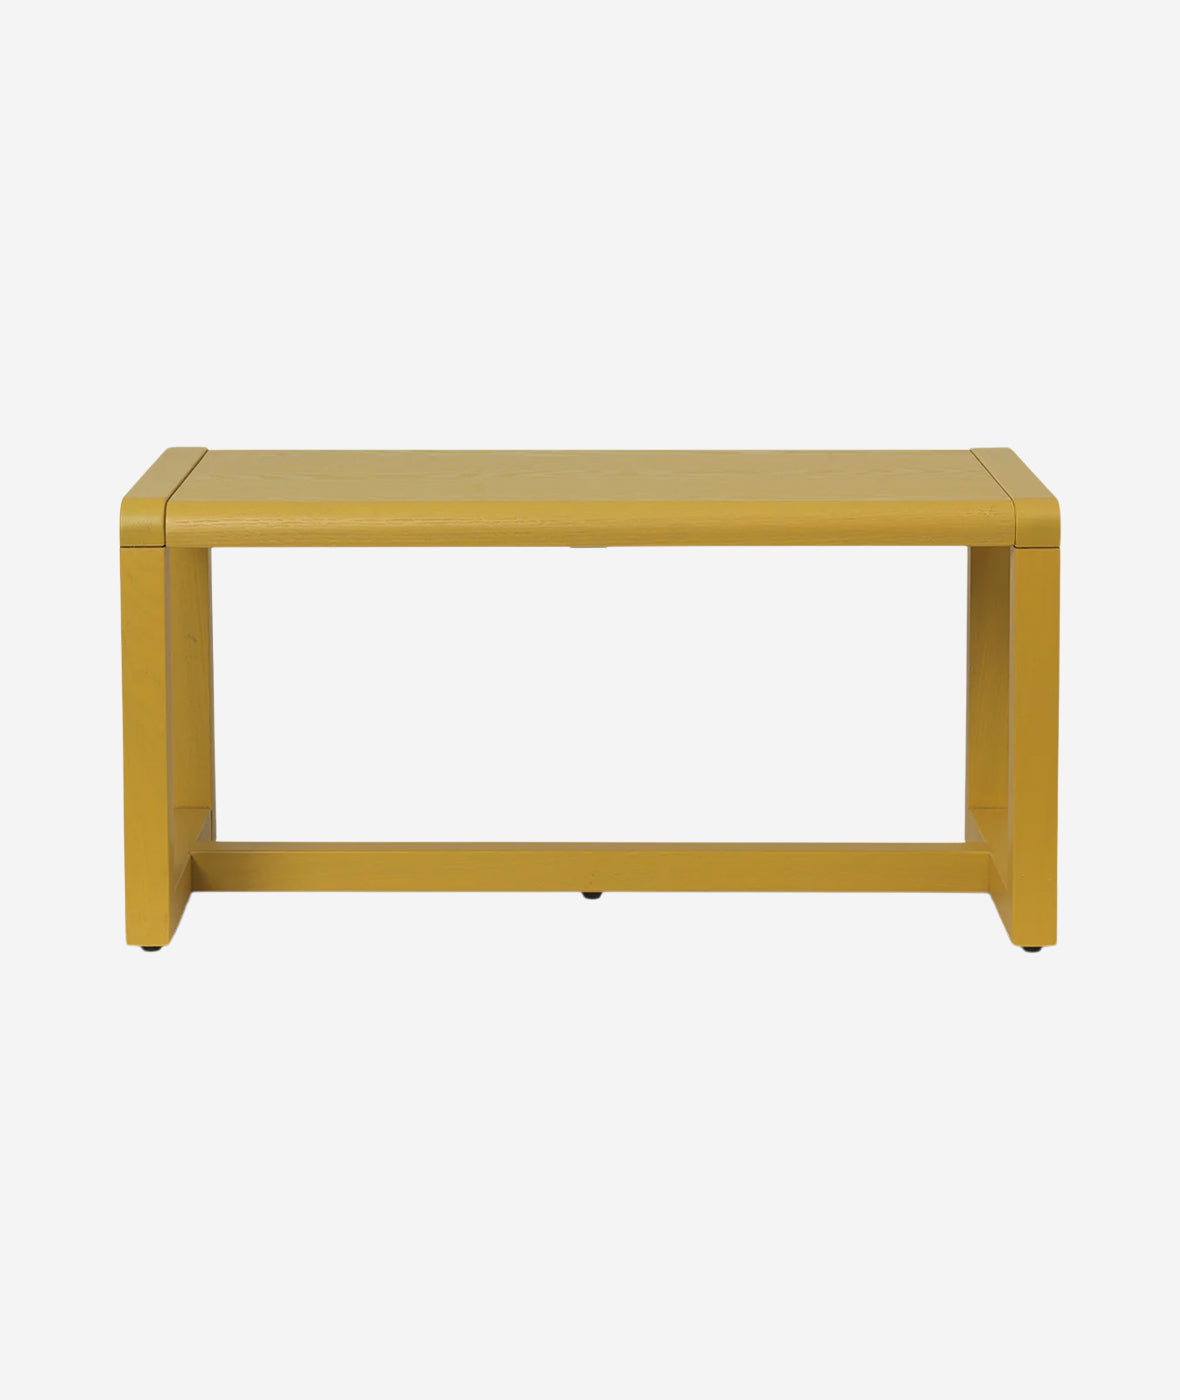 Little Architect Bench - More Options